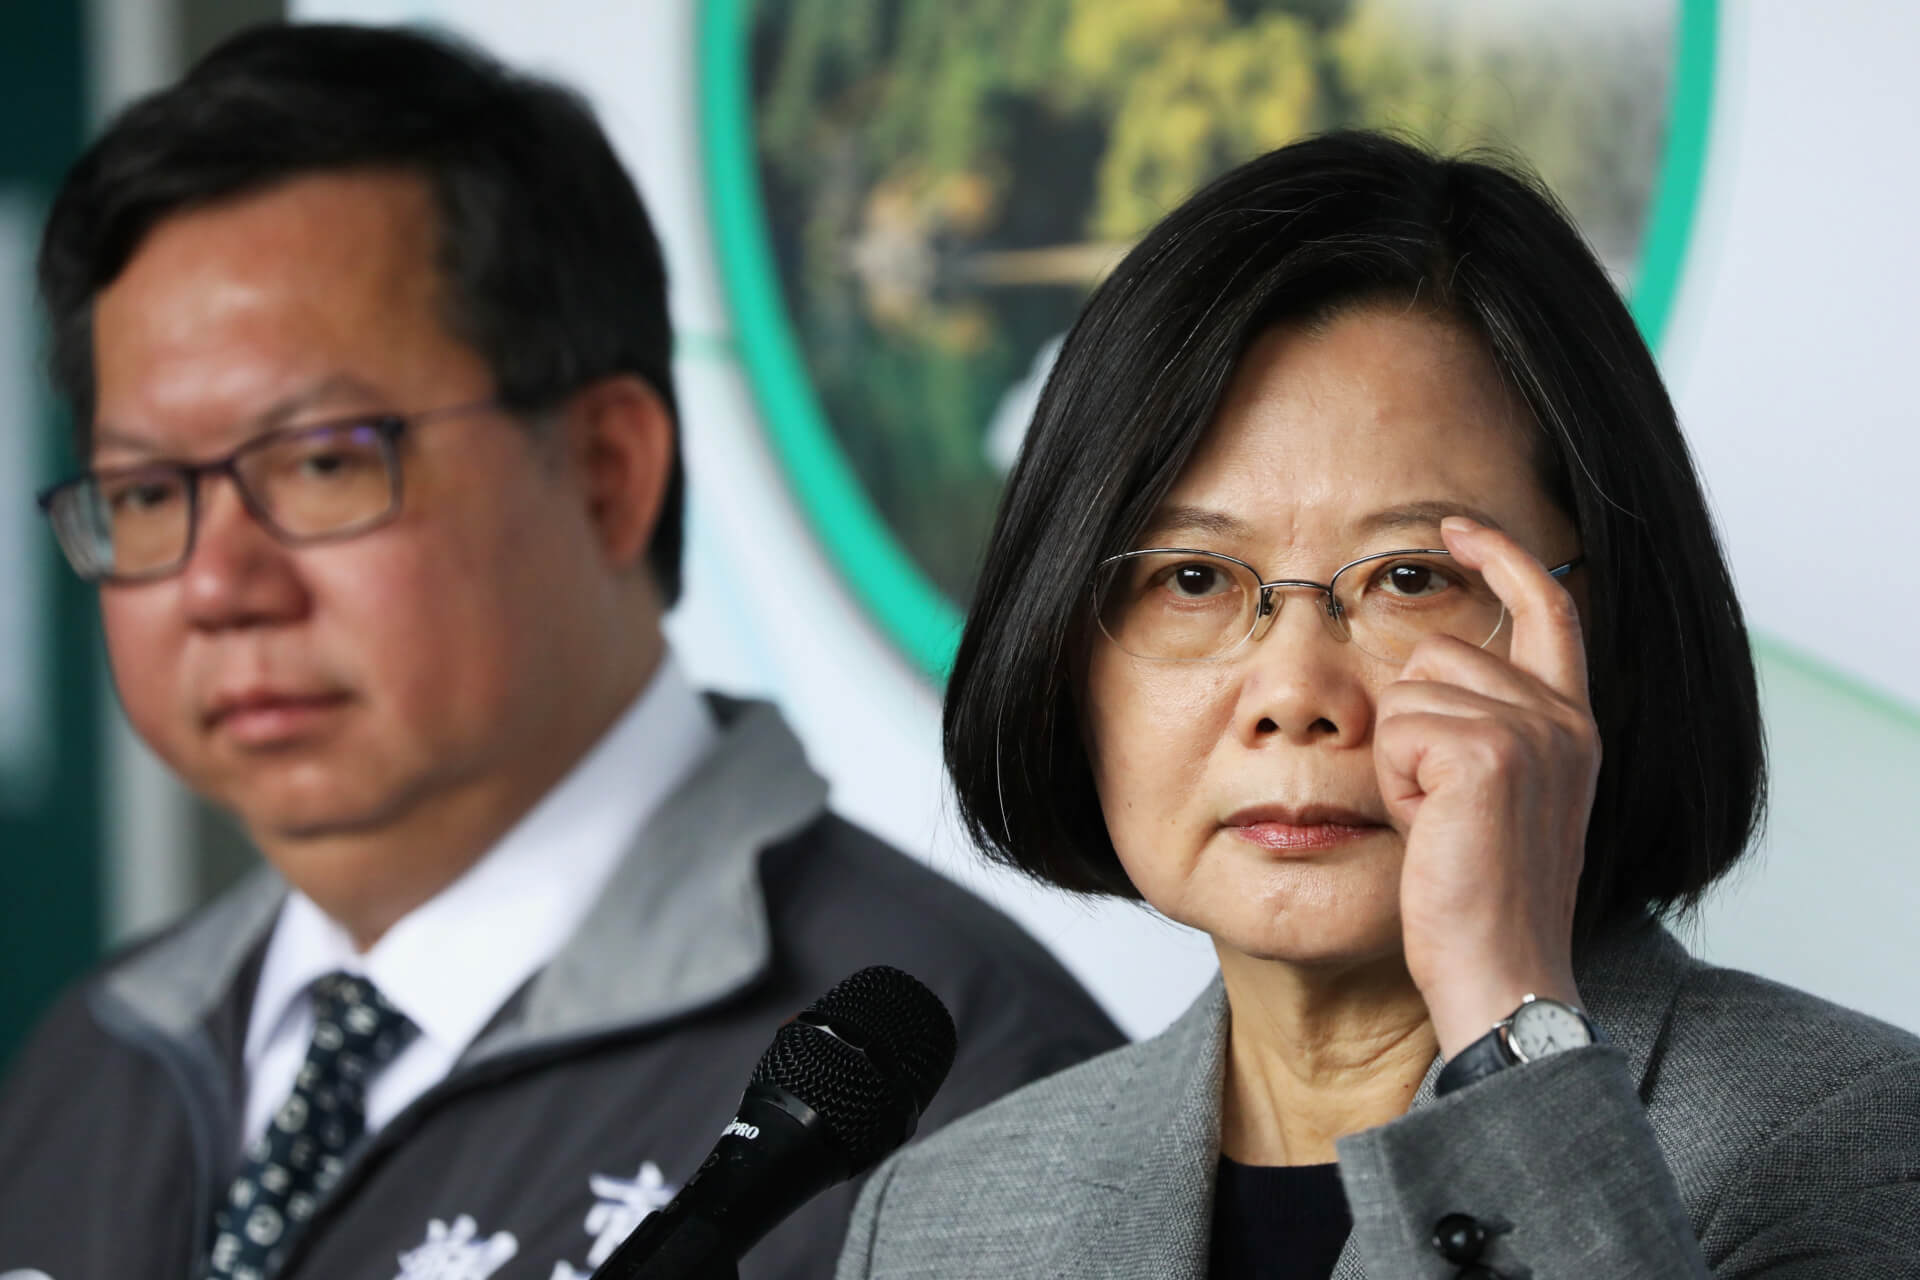 Taiwan Says Linking its Situation to Ukraine is “Inappropriate”